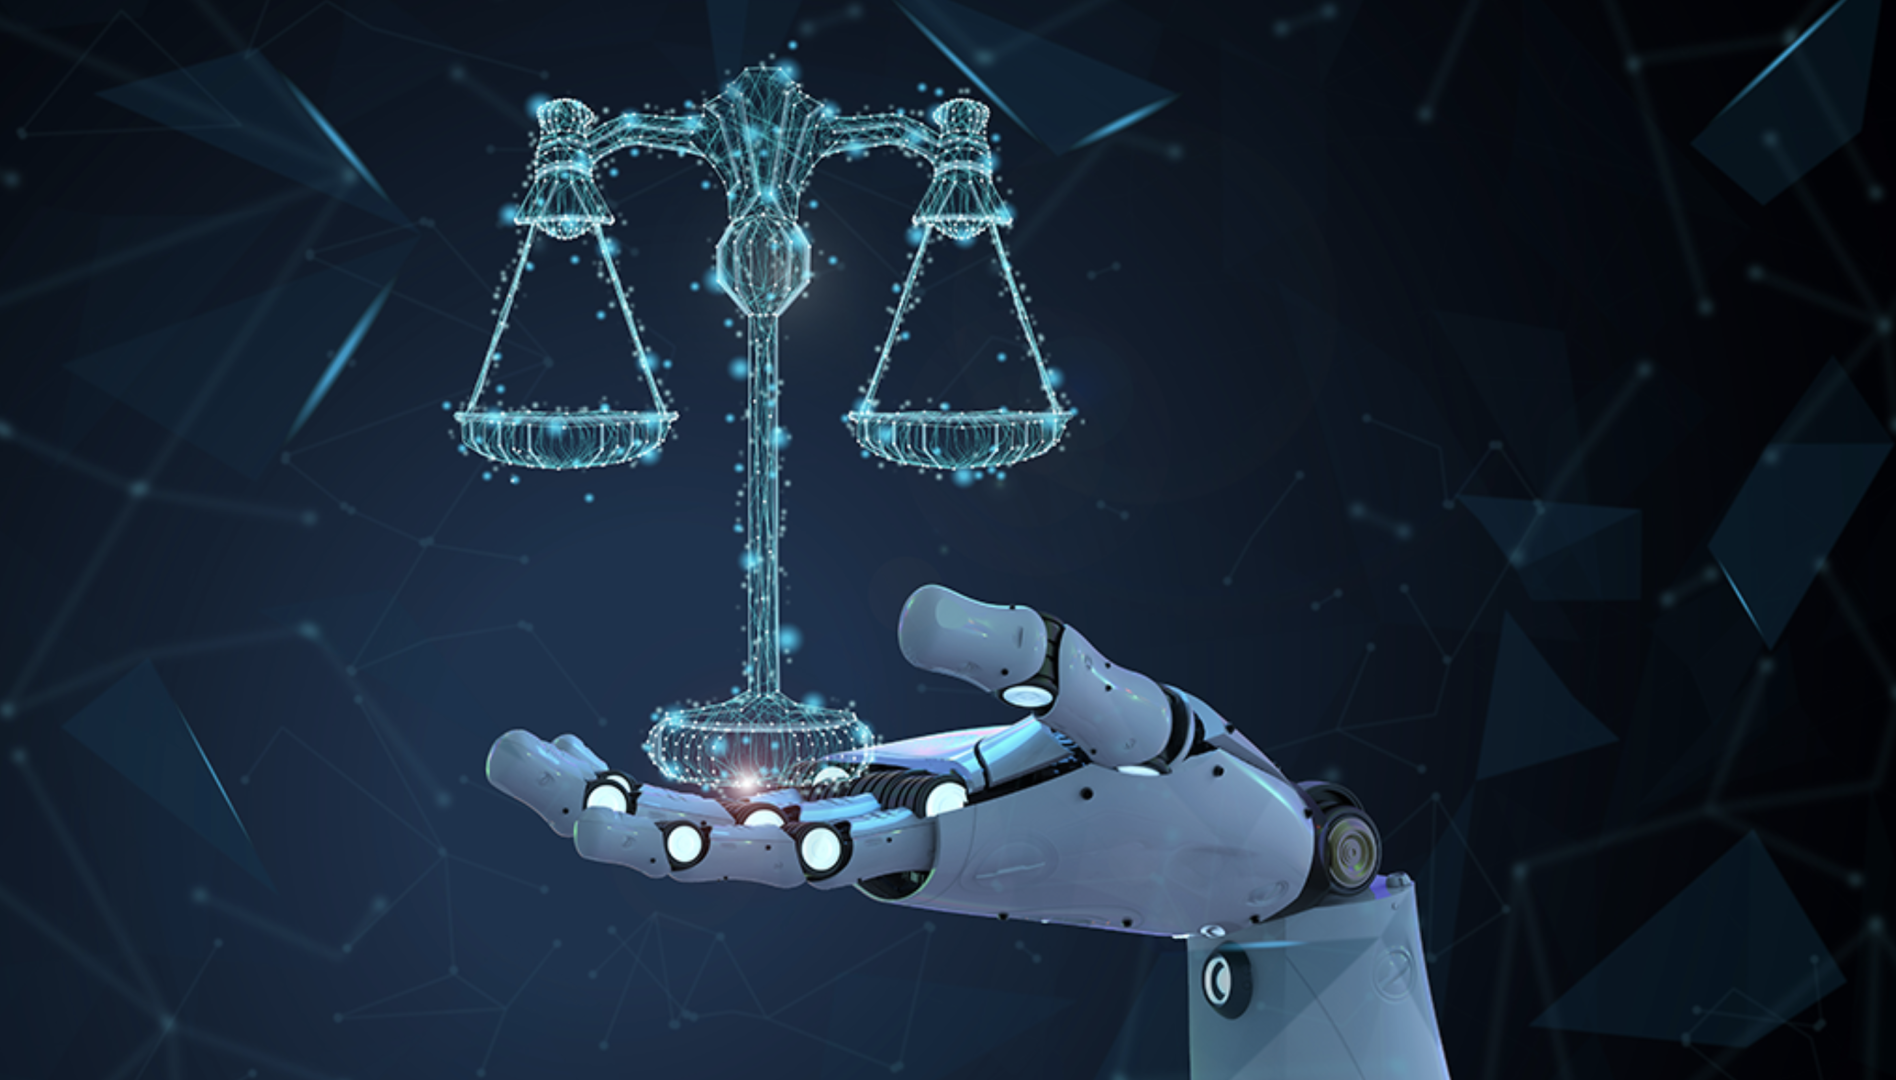 LLMs: AI Regulation Without the Human Mind? Maybe Not